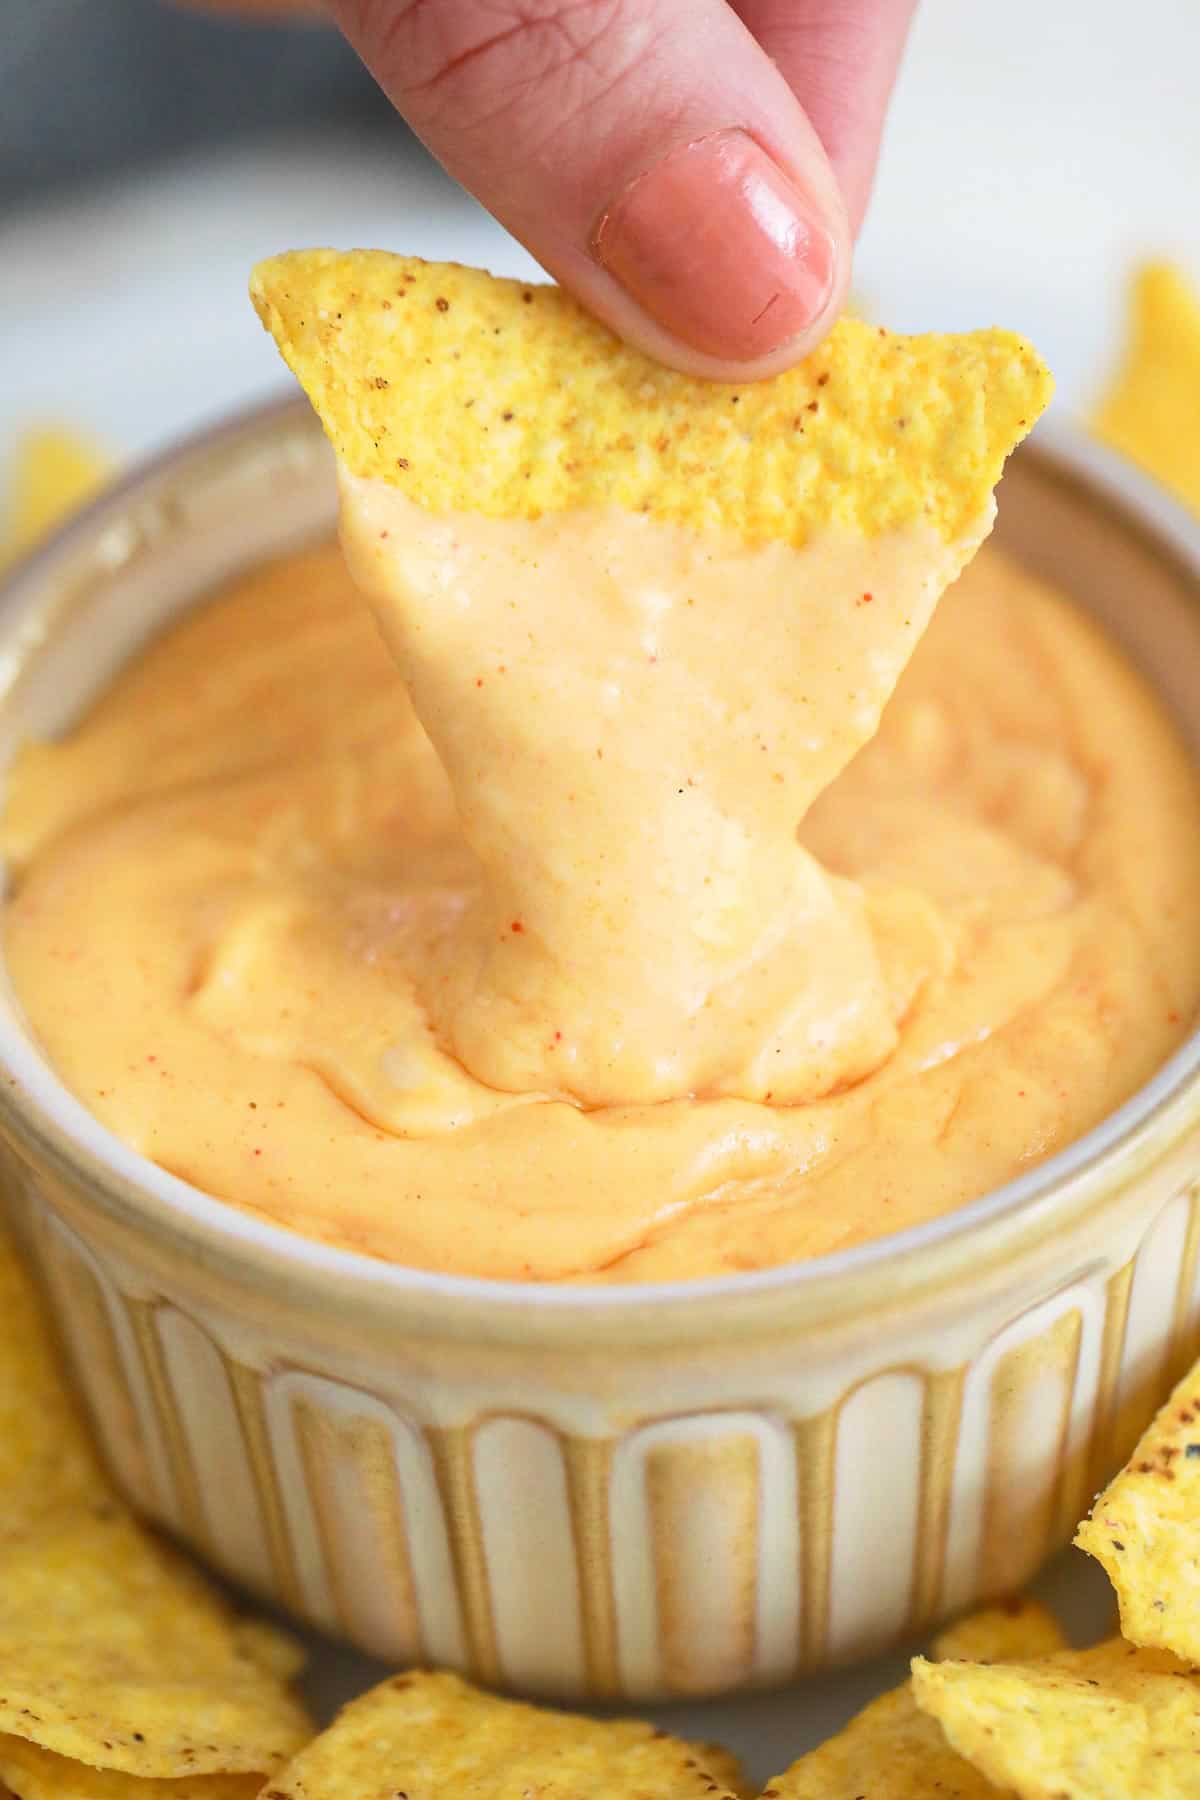 a chip being dipped into nacho cheese